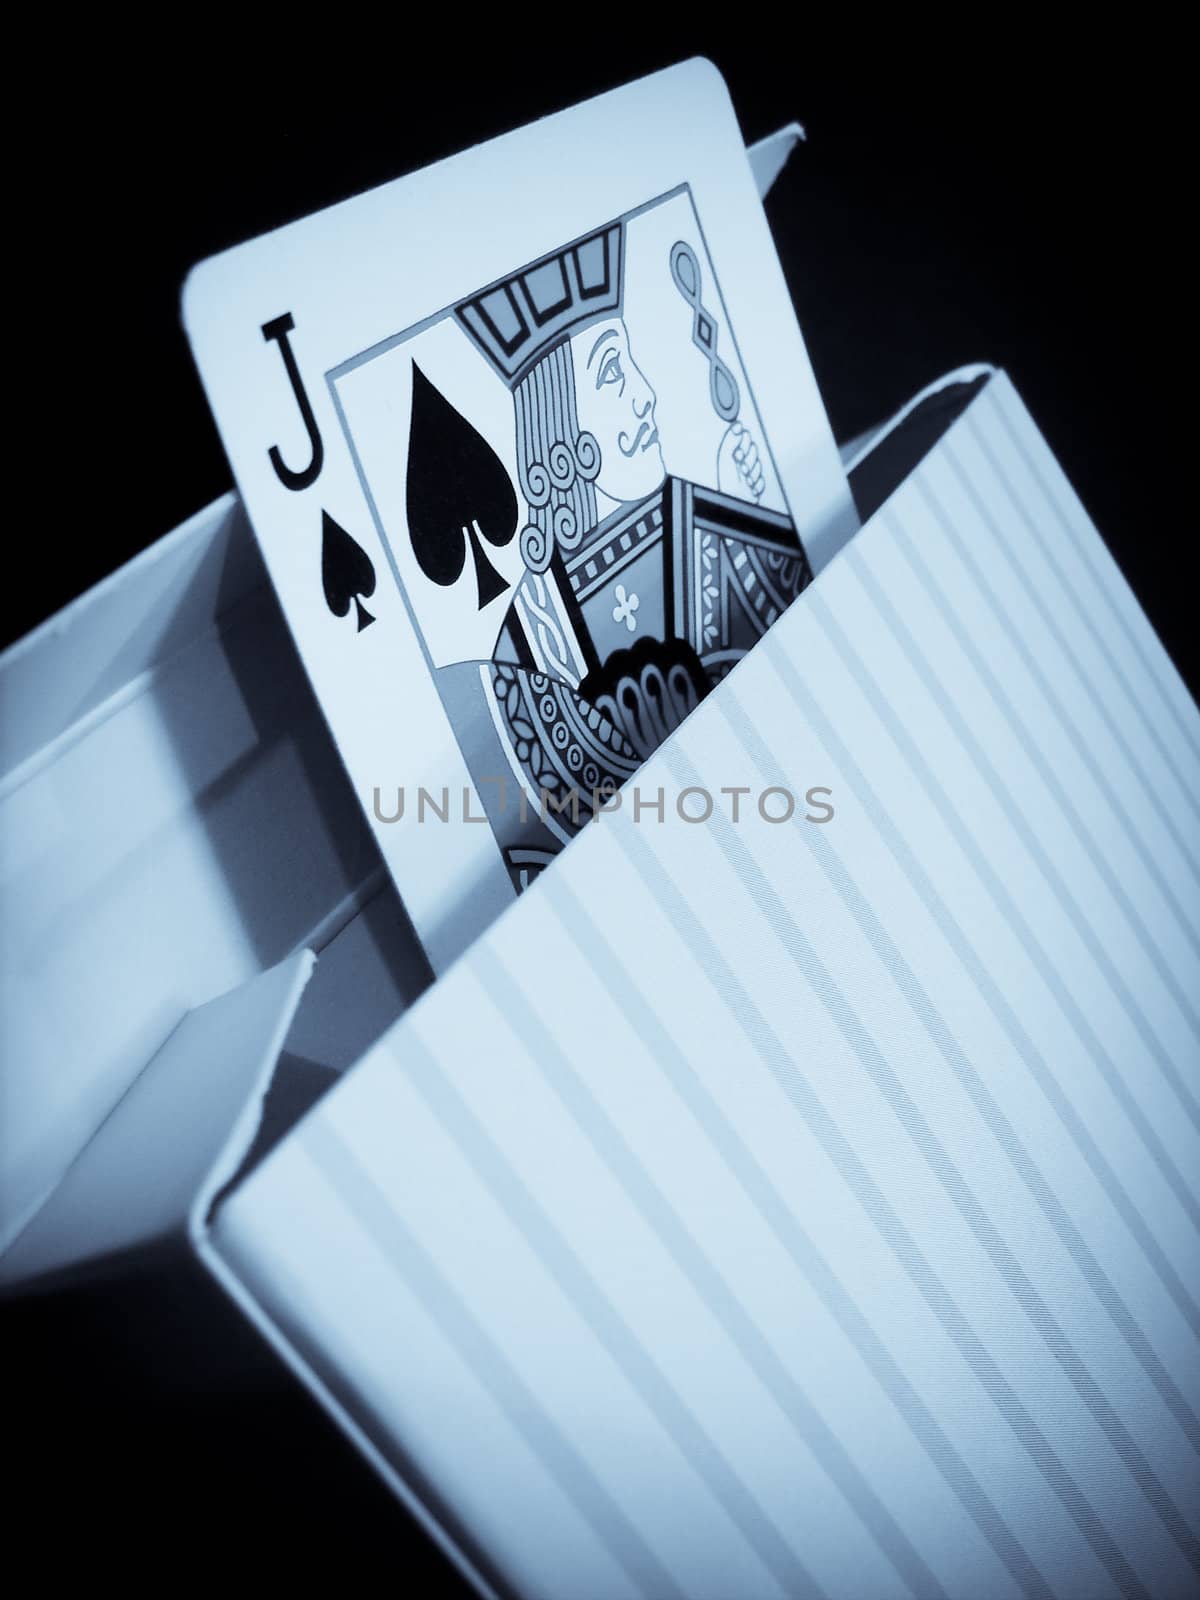 Jack of spades in a box, a conceptual photograph of jack in the box